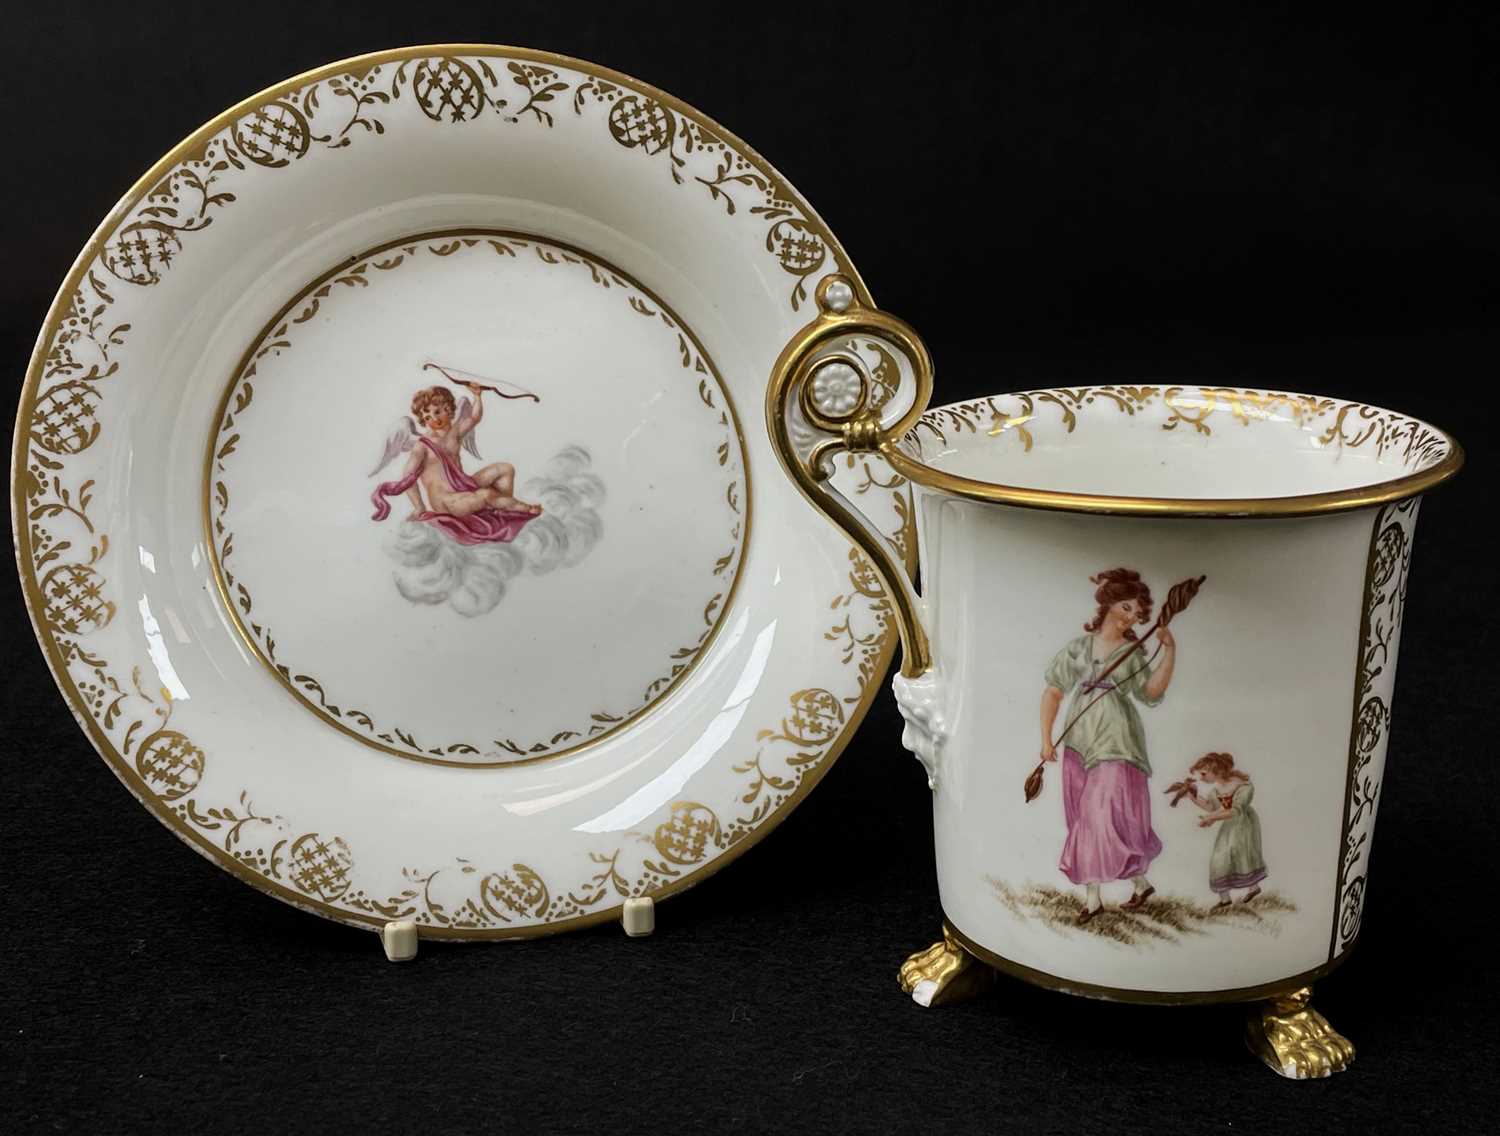 RARE SWANSEA PORCELAIN CABINET CUP & SAUCER circa 1814-1820, the cup of cylindrical form with - Image 2 of 3